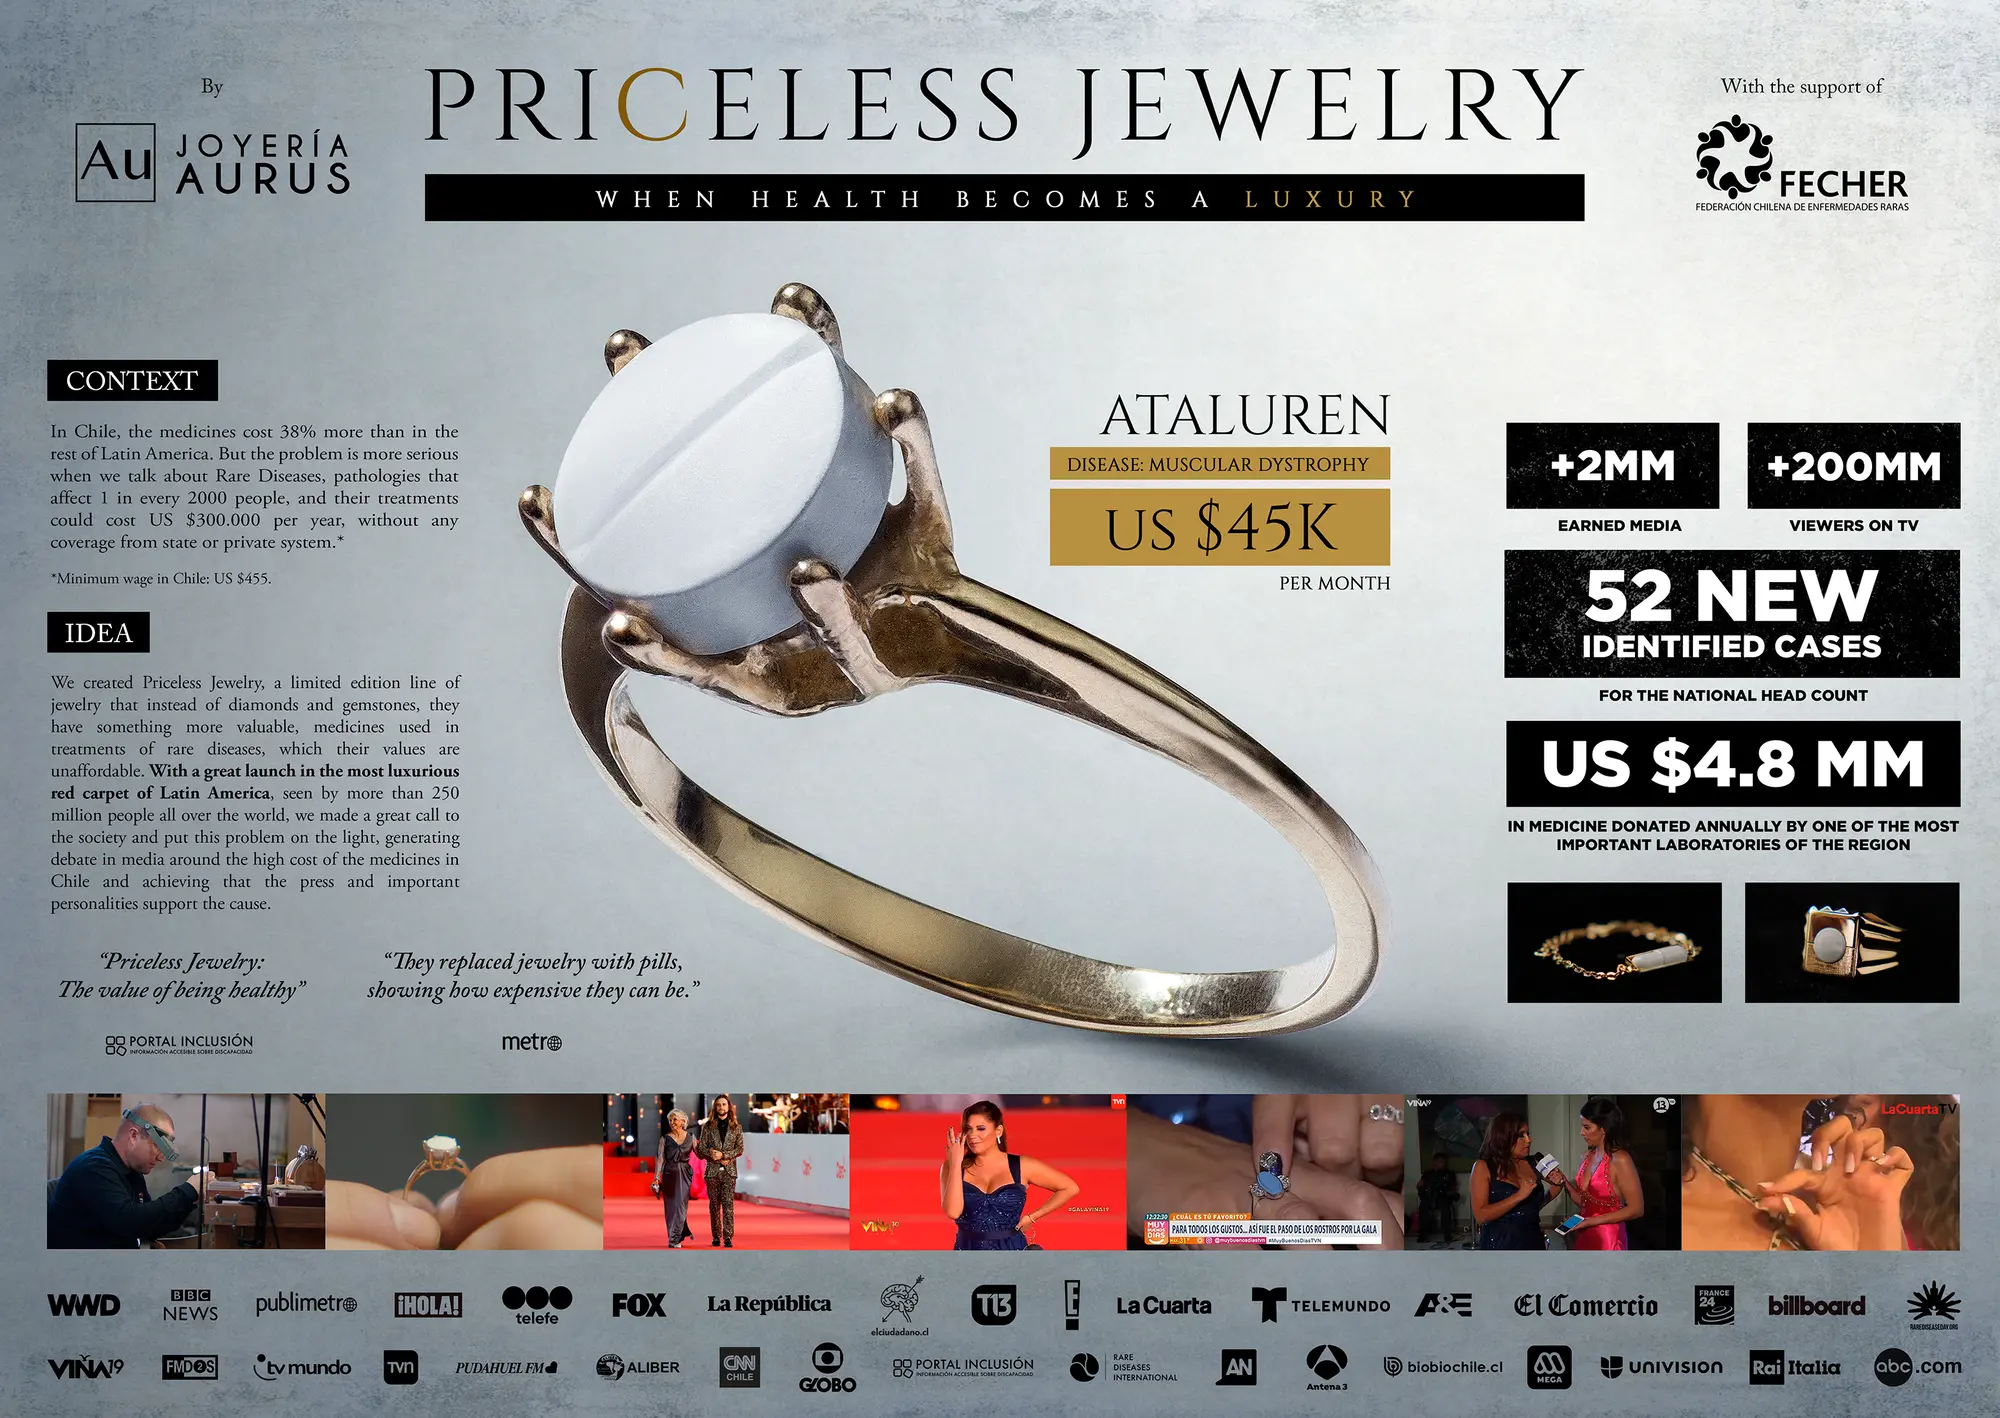 Joyería Aurus, Priceless Jewelry, Campaigns of the world, Healthcare campaign